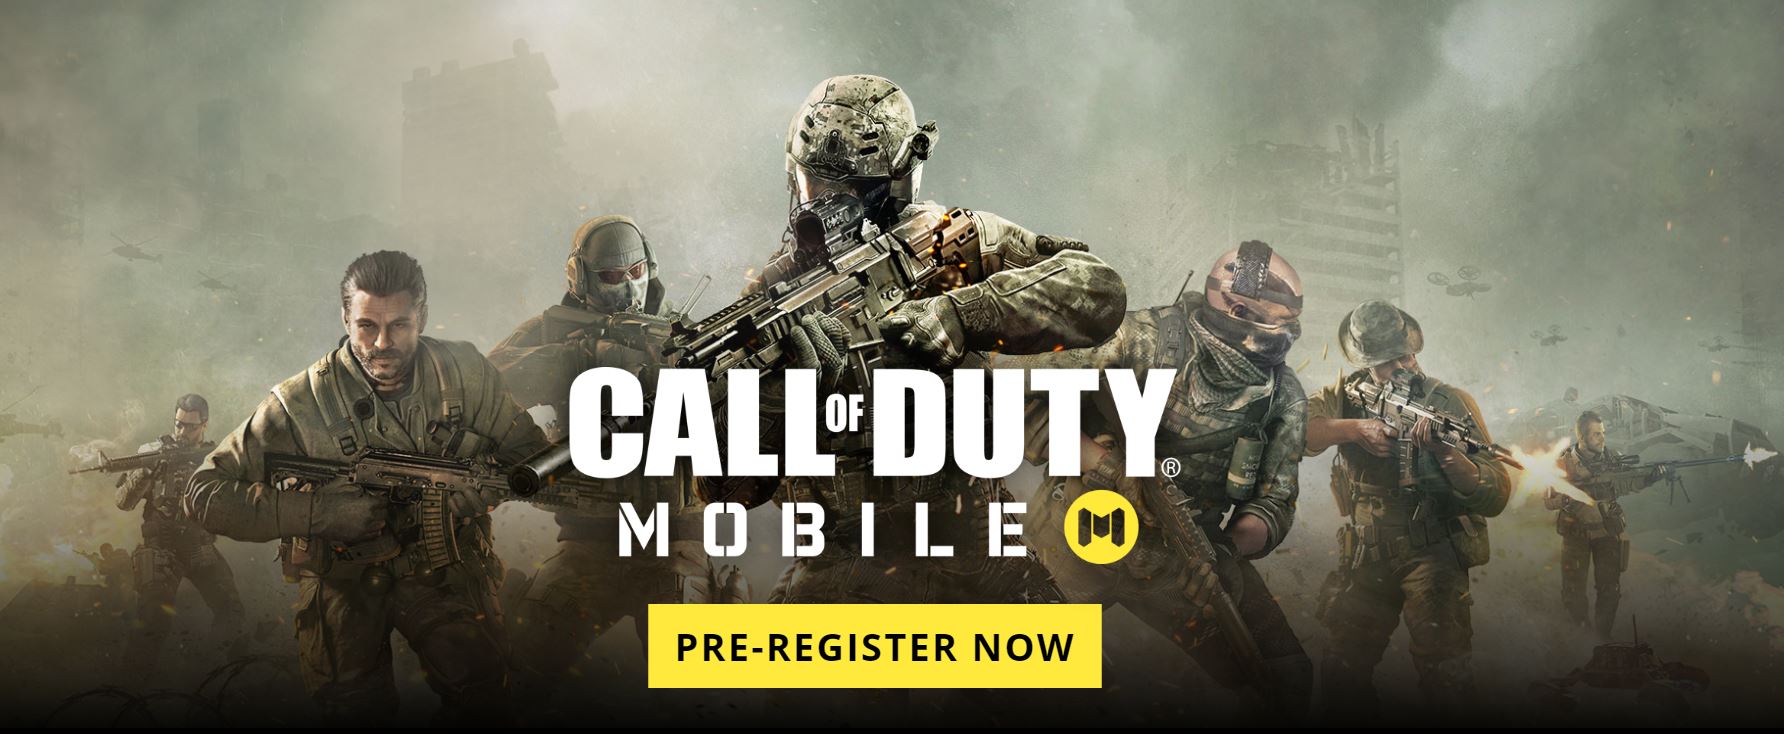 Call of Duty mobile. Call of Duty mobile Battle Royale. Call of Duty 2020. Сборки калов дьюти мобайл